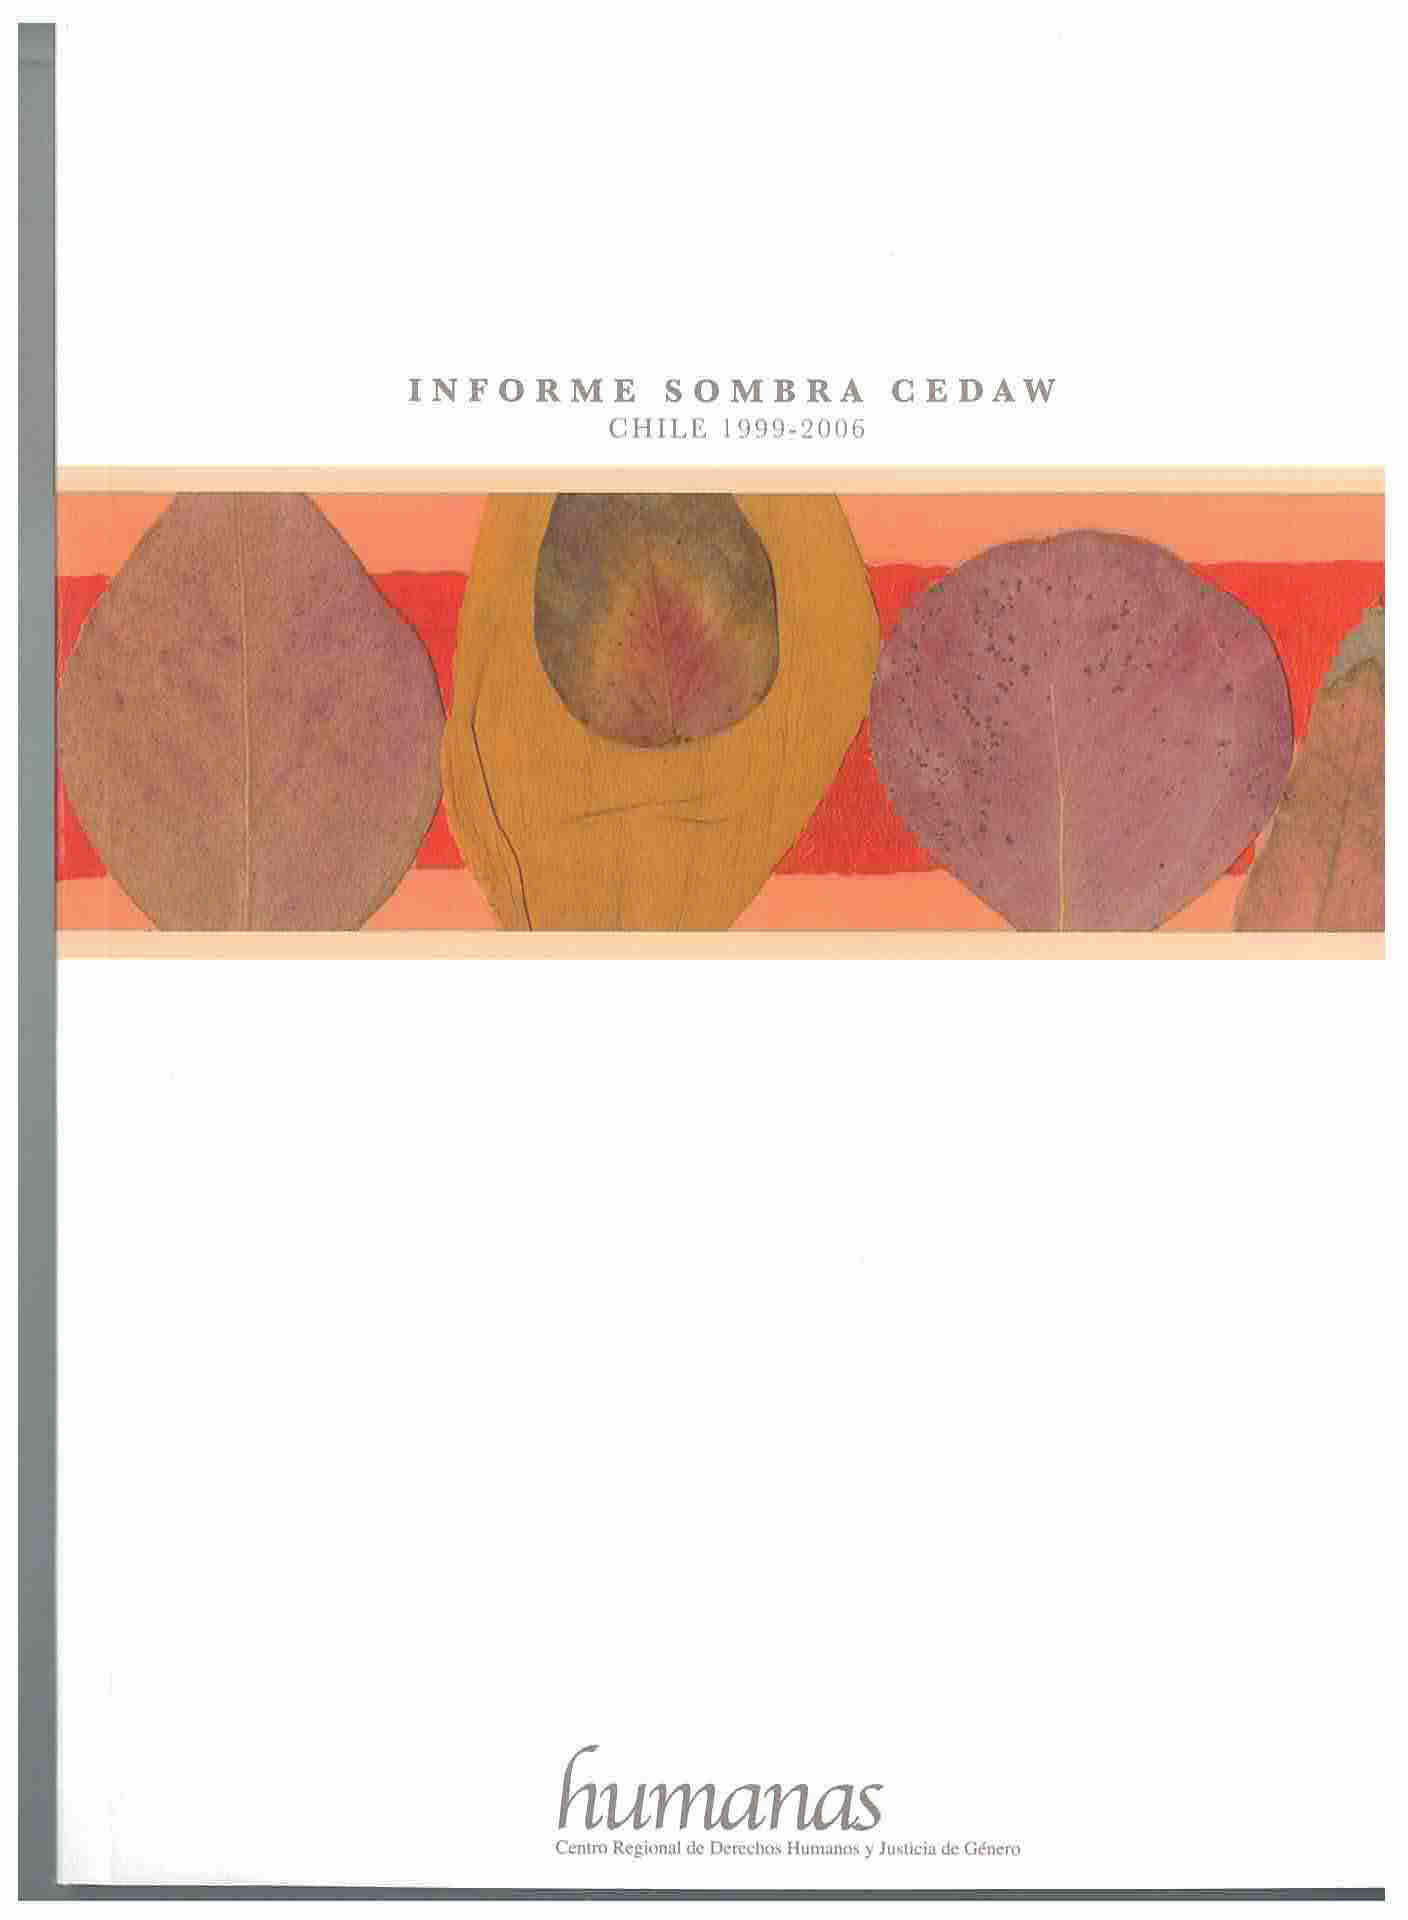 Informe sombra Cedaw Chile 1999-2006